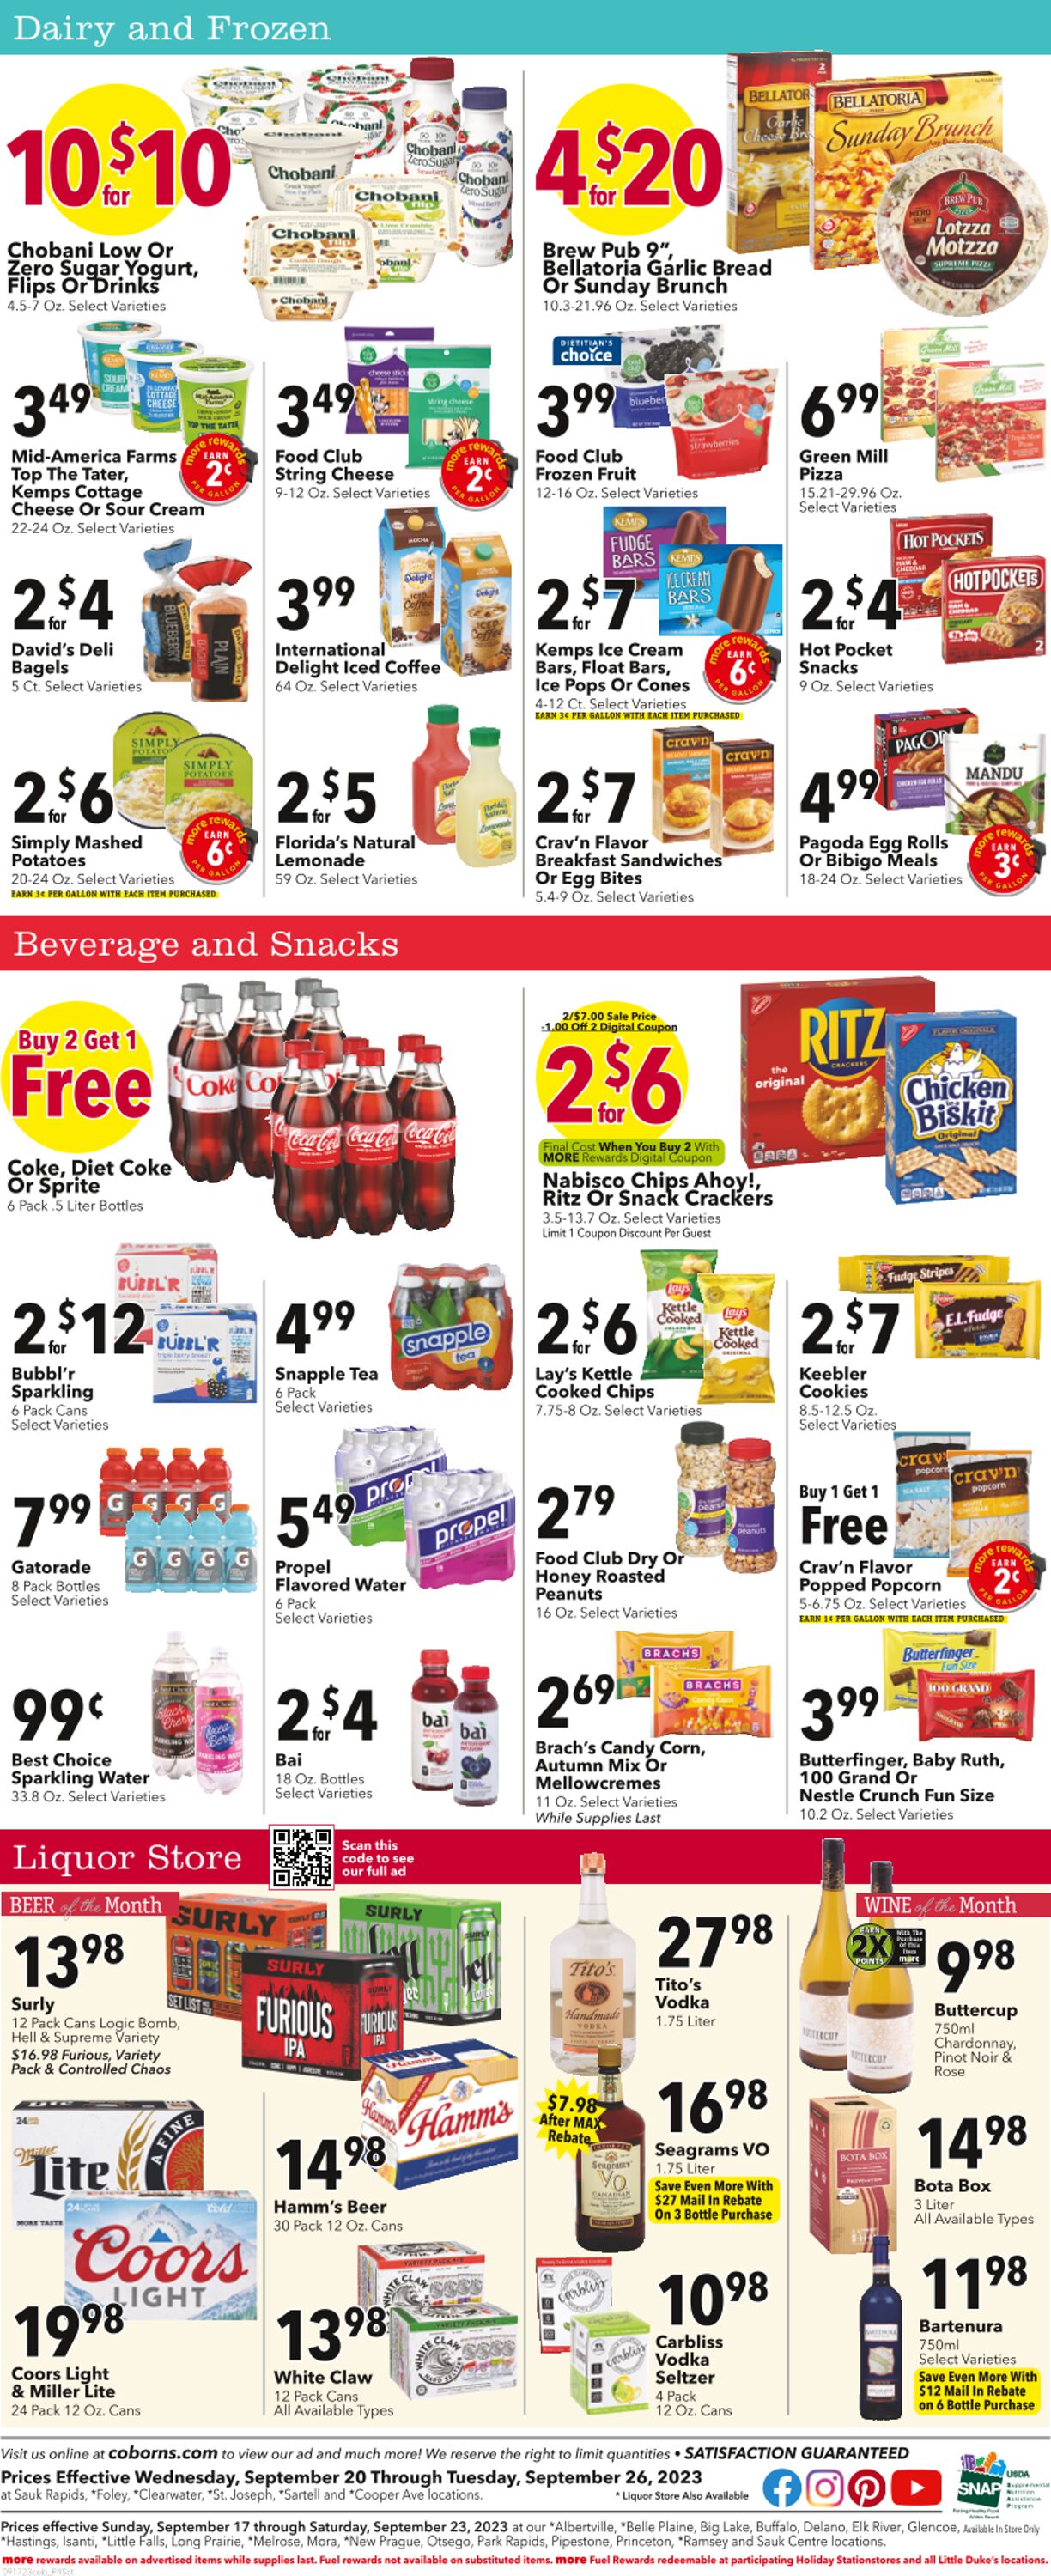 Weekly ad Coborn's 09/21/2023 - 09/27/2023